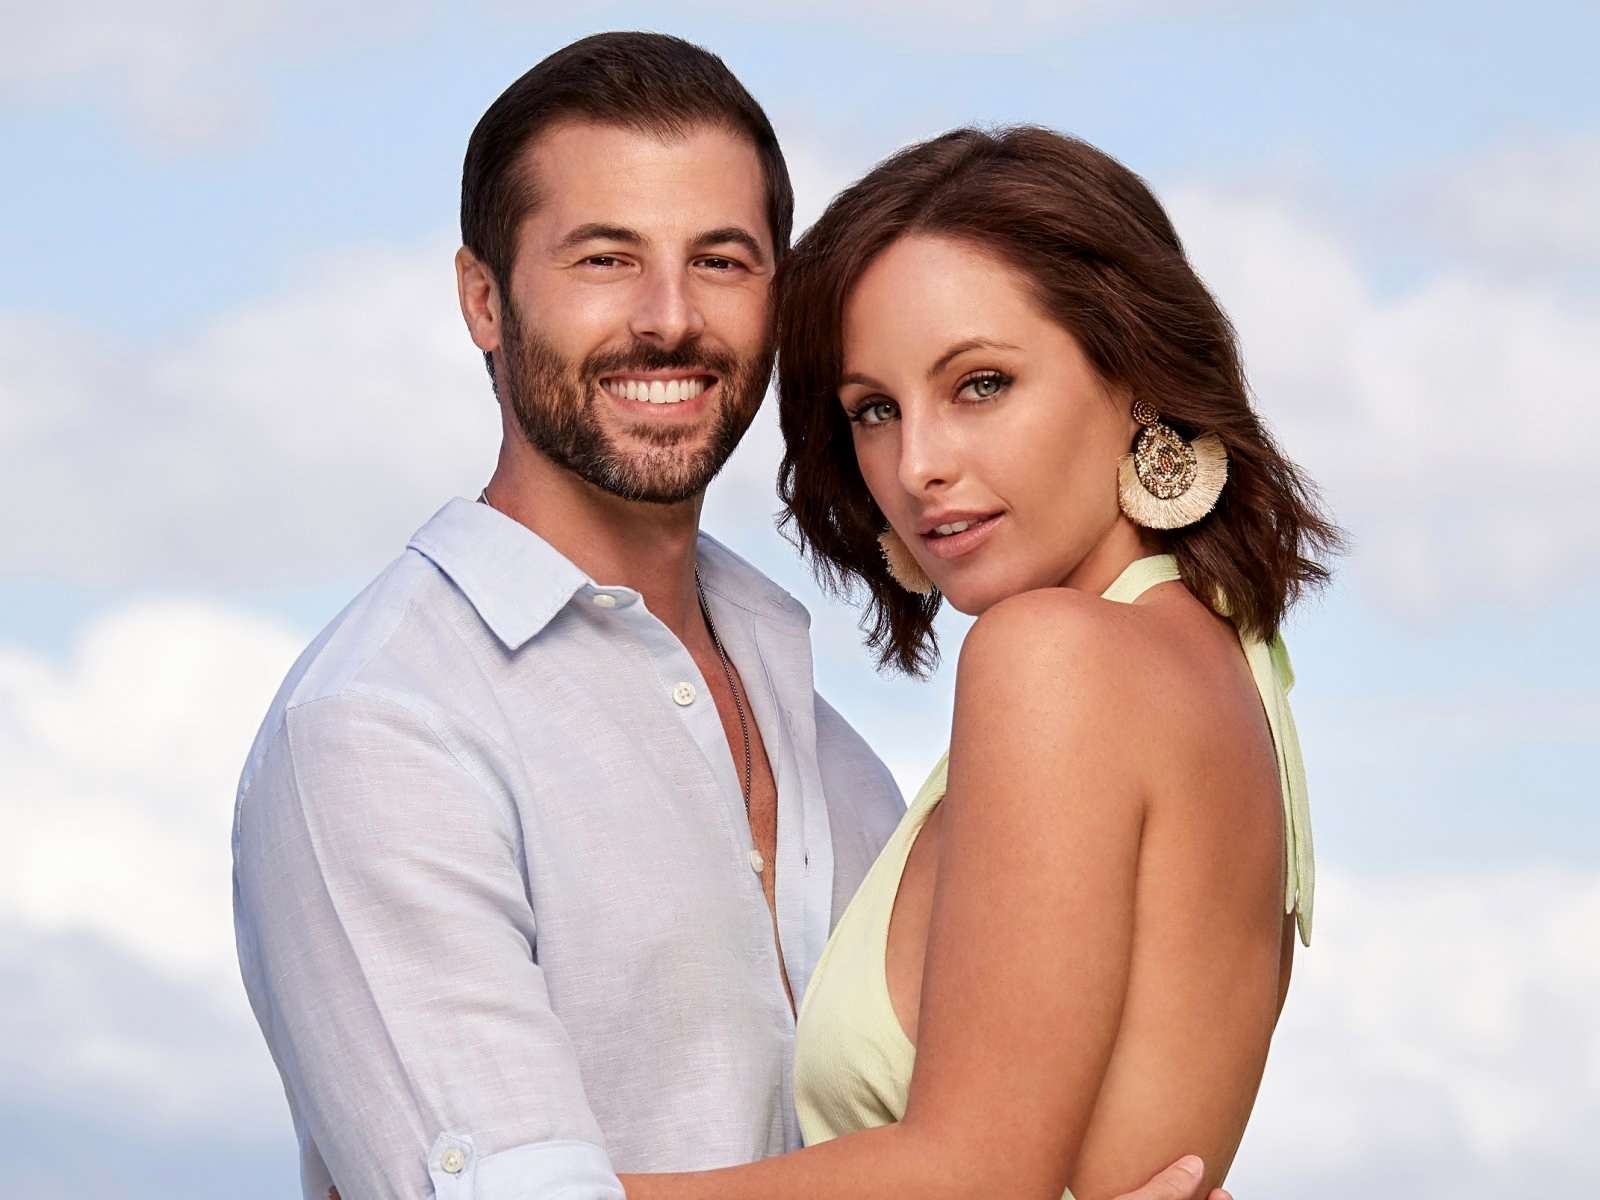 Temptation Island Season 3 premiere Four new couples arrive and meet 24 sexy singles pic